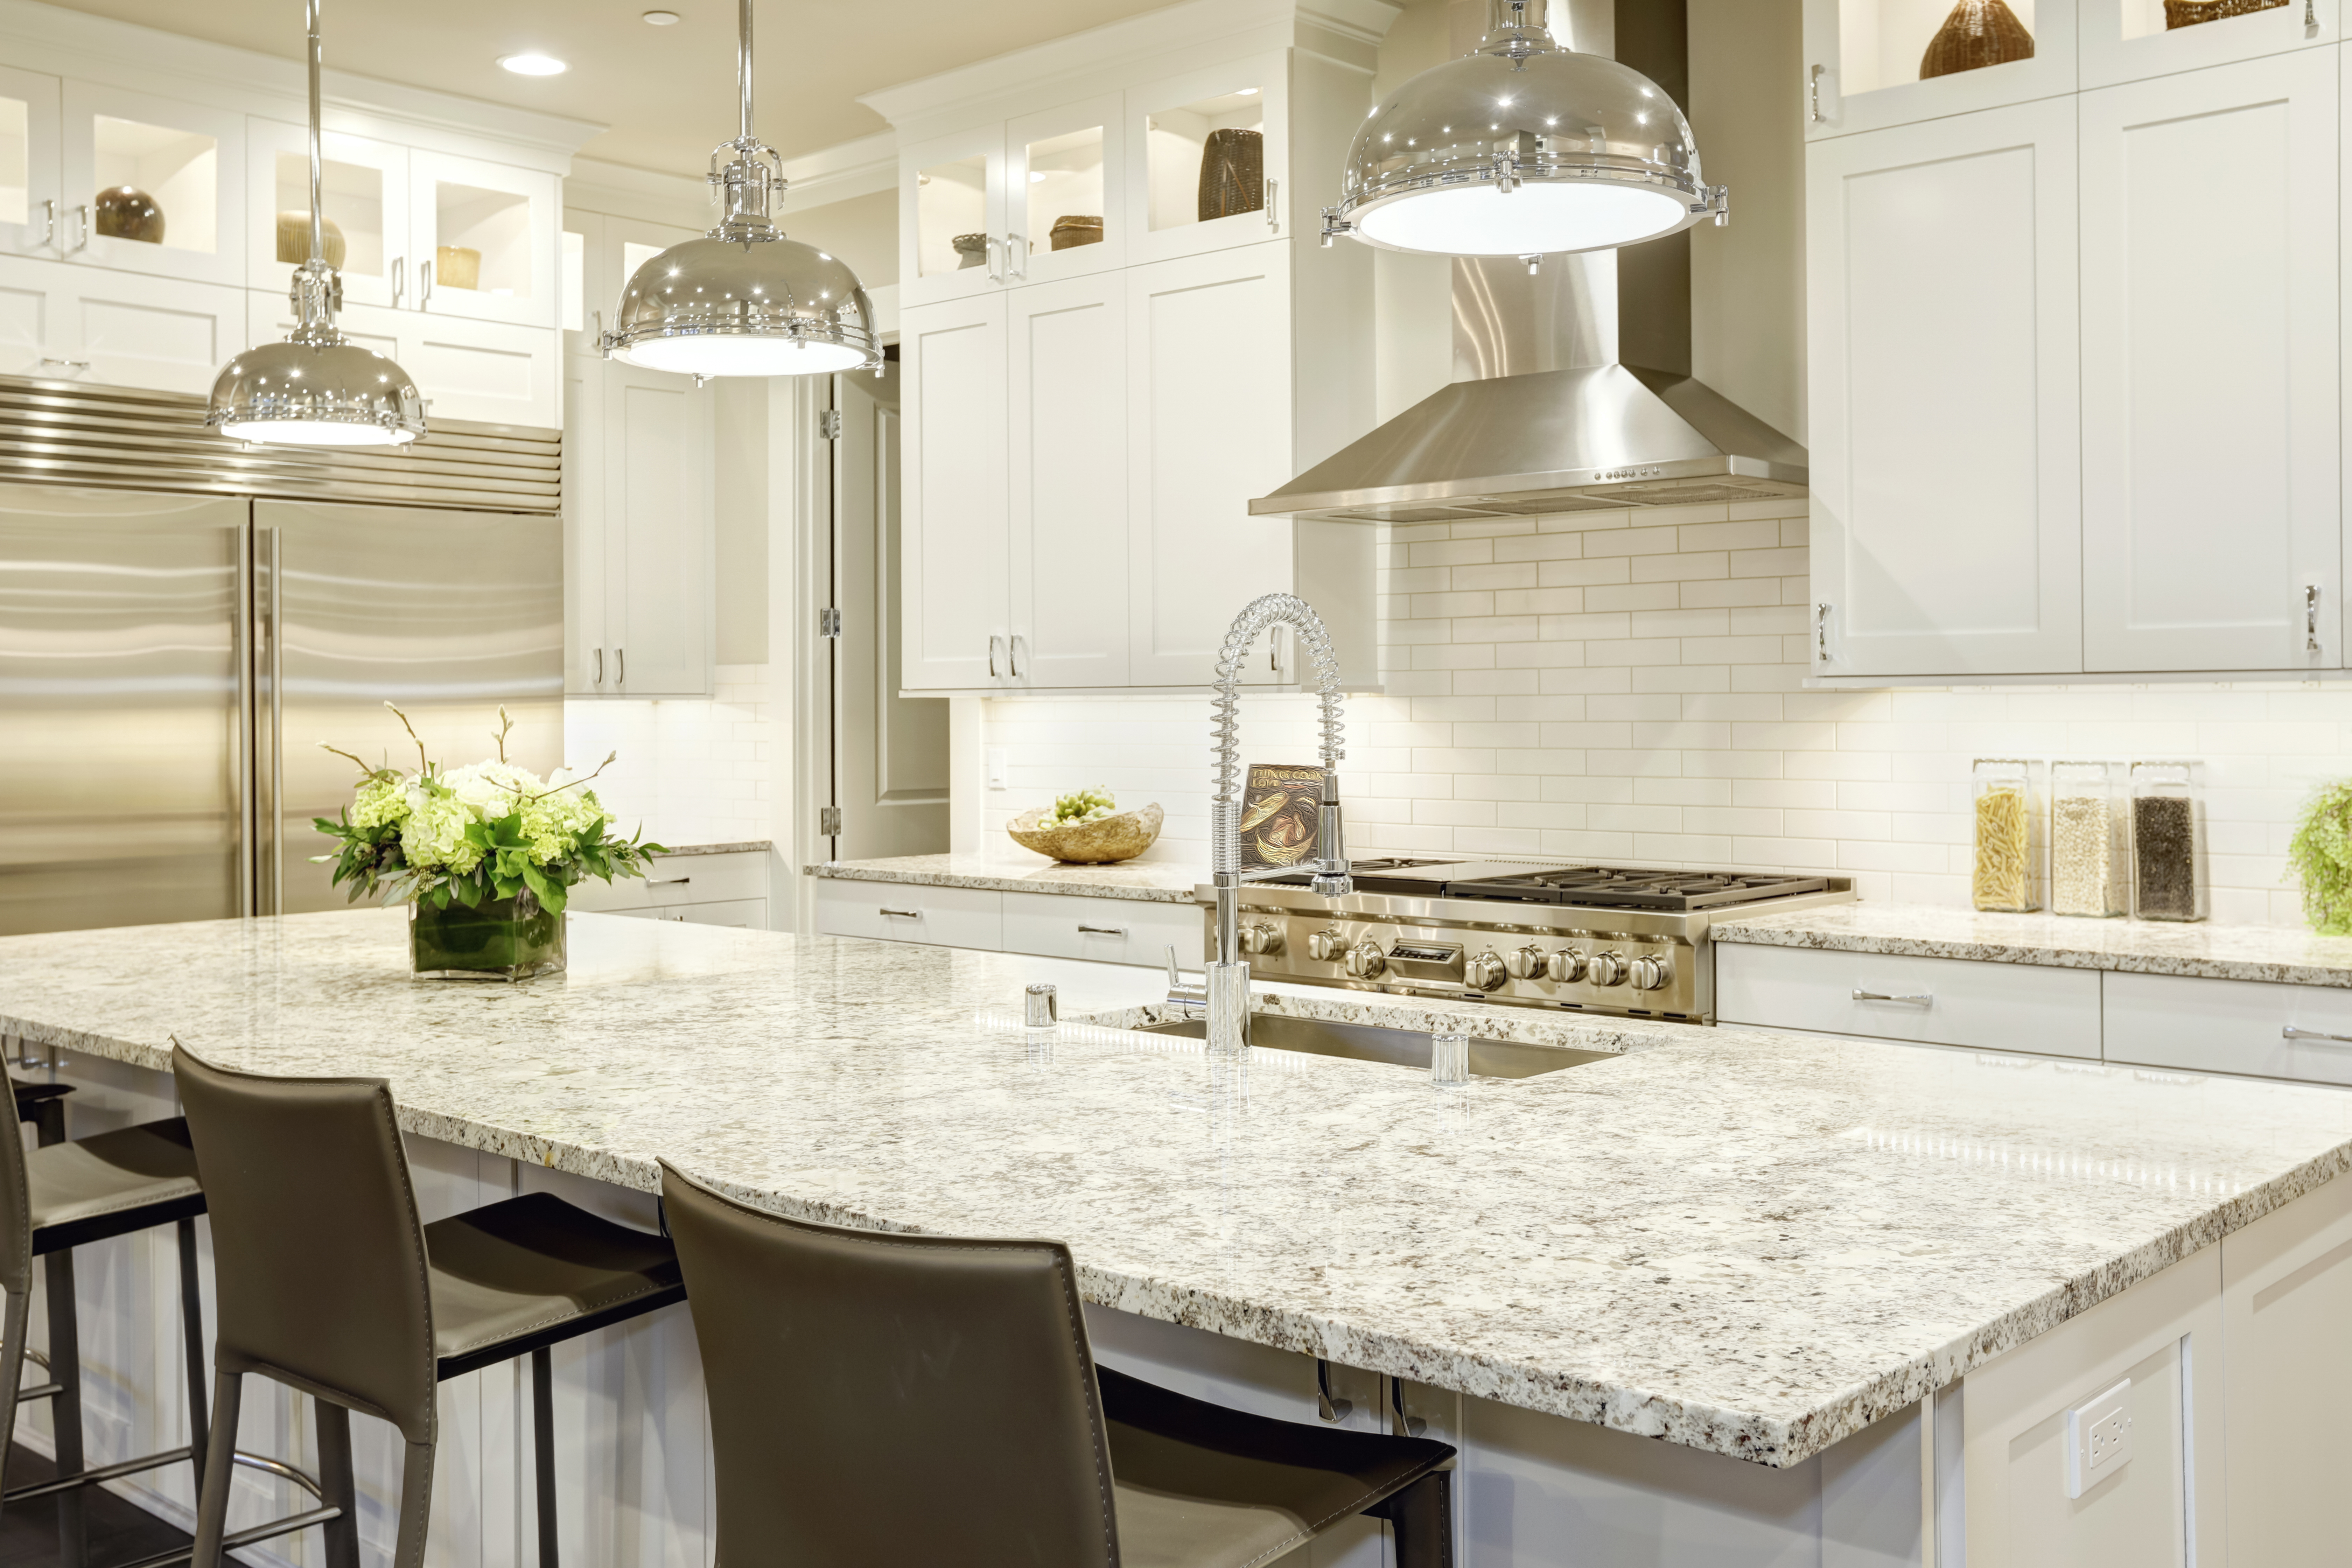 White kitchen renovation design features large bar style kitchen island with granite countertop illuminated by modern pendant lights. Stainless steel appliances framed by white shaker cabinets